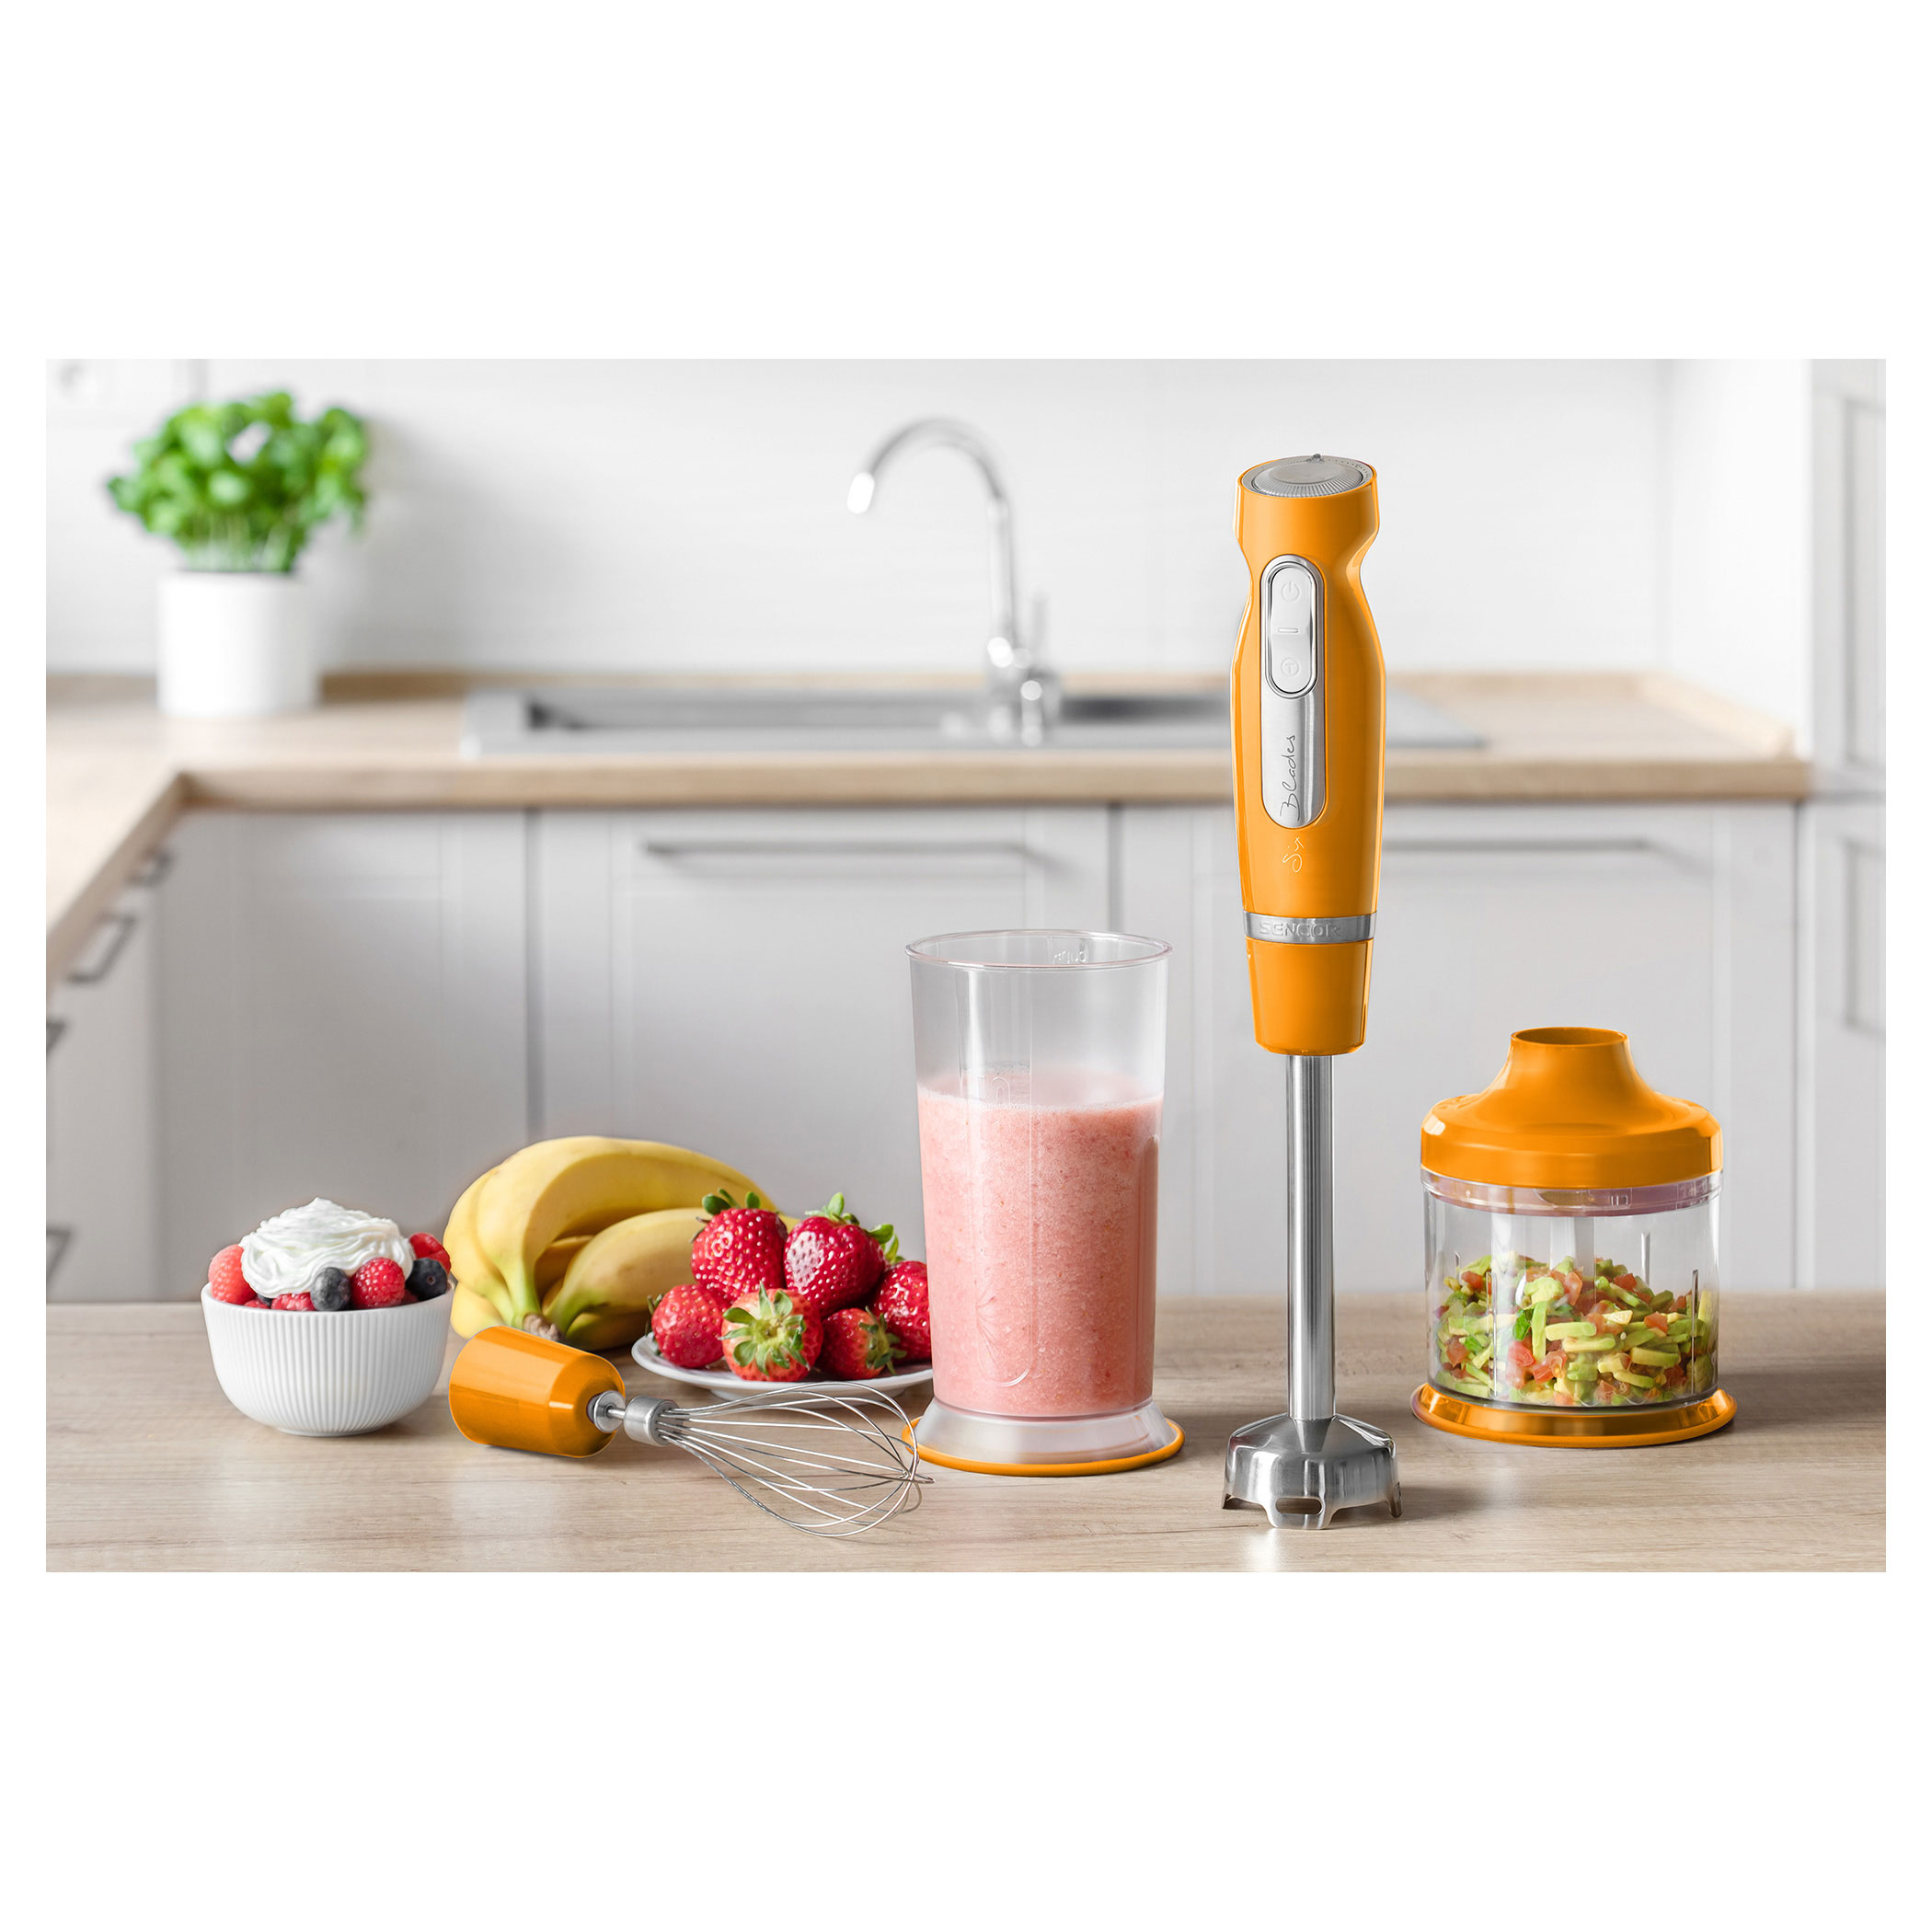 Cuisinart Smart Stick Variable Speed Cordless Hand Blender With Ele  Countric Knife, Stainless Steel 